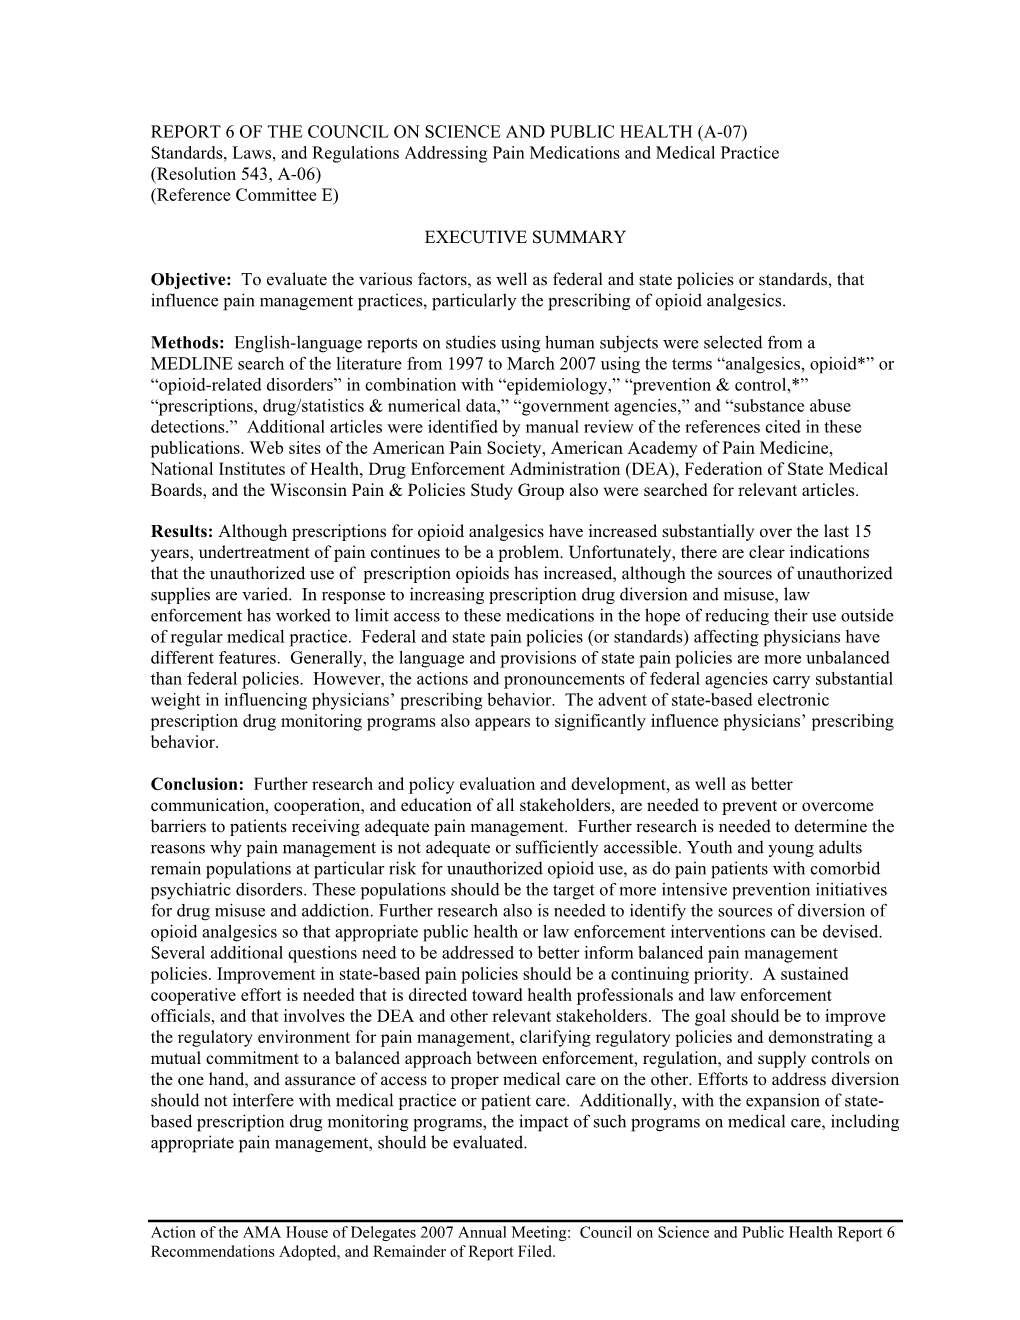 Standards, Laws, and Regulations Addressing Pain Medications and Medical Practice (Resolution 543, A-06) (Reference Committee E)